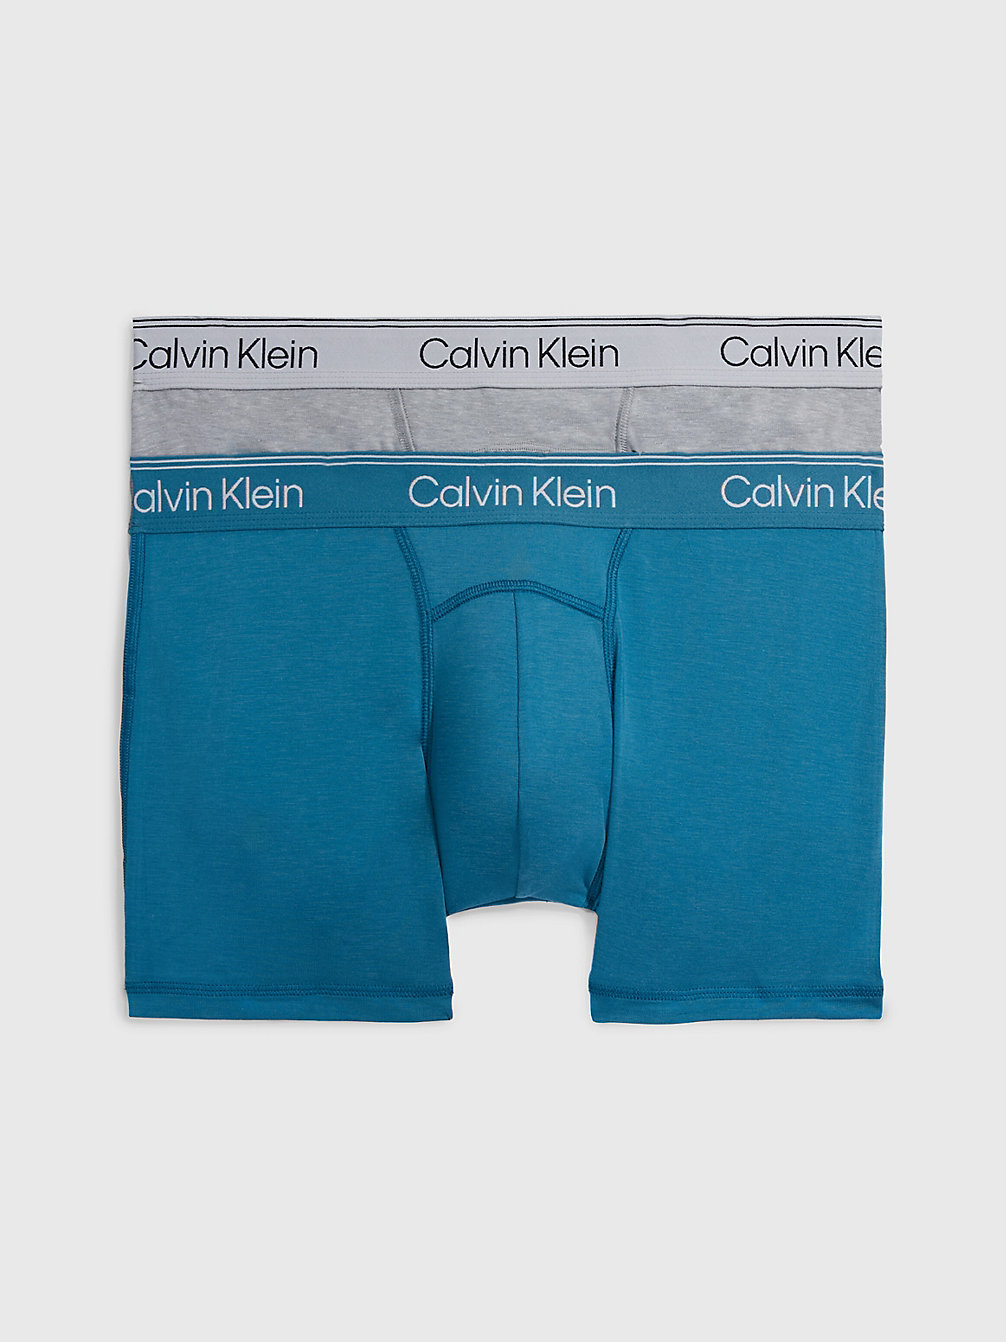 MIDNIGHT, ATHLETIC GREY HEATHER Lot De 2 Boxers - Athletic Cotton undefined hommes Calvin Klein